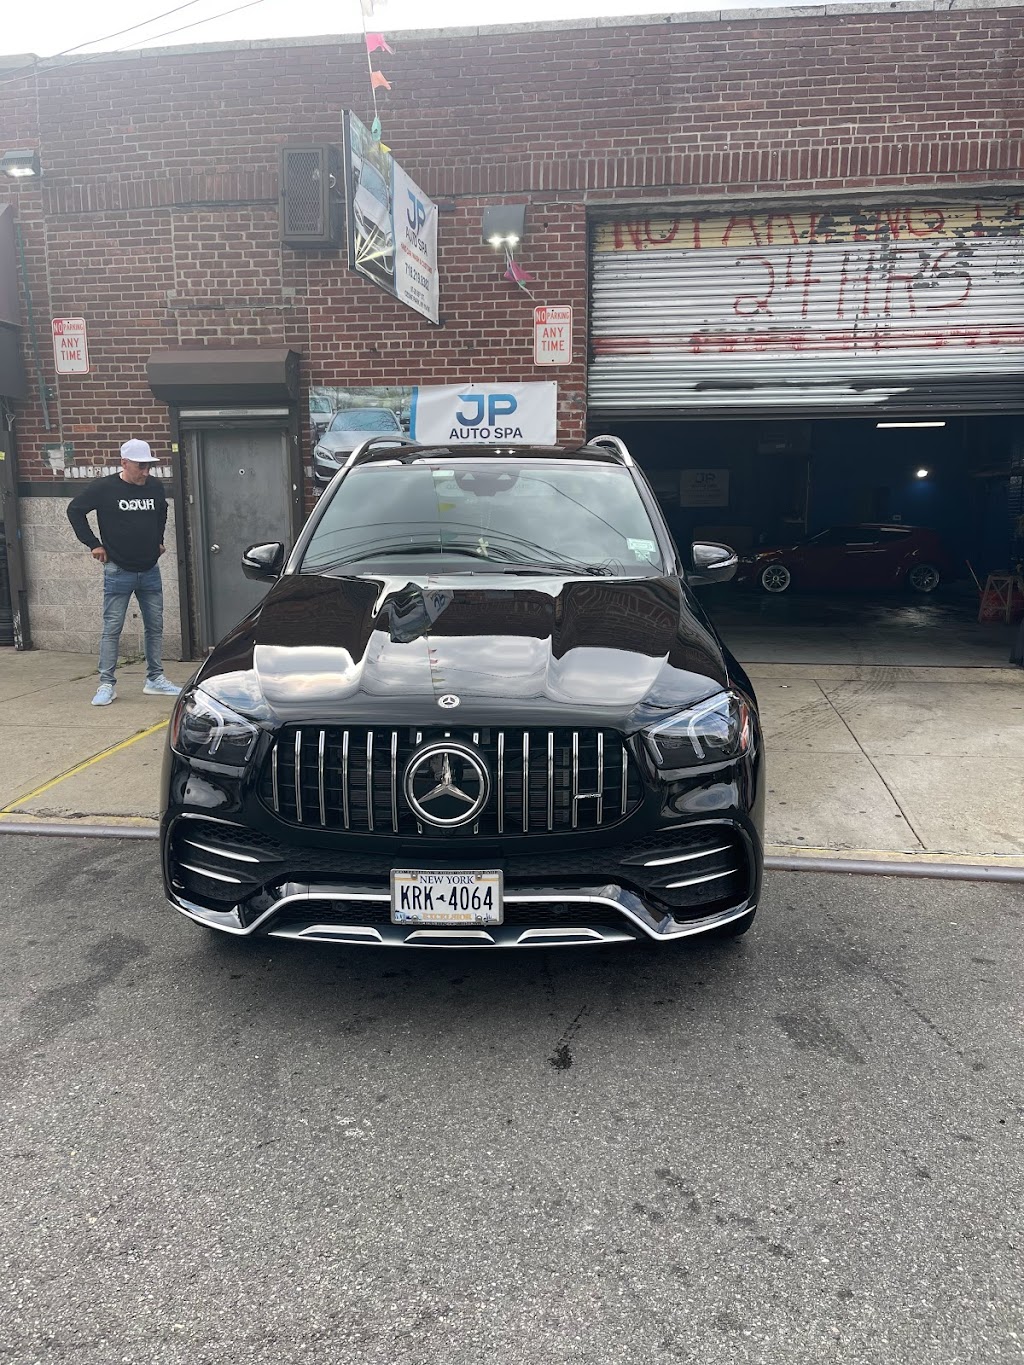 JP Auto Spa | 97-26 99th St, Queens, NY 11416, USA | Phone: (347) 571-5845